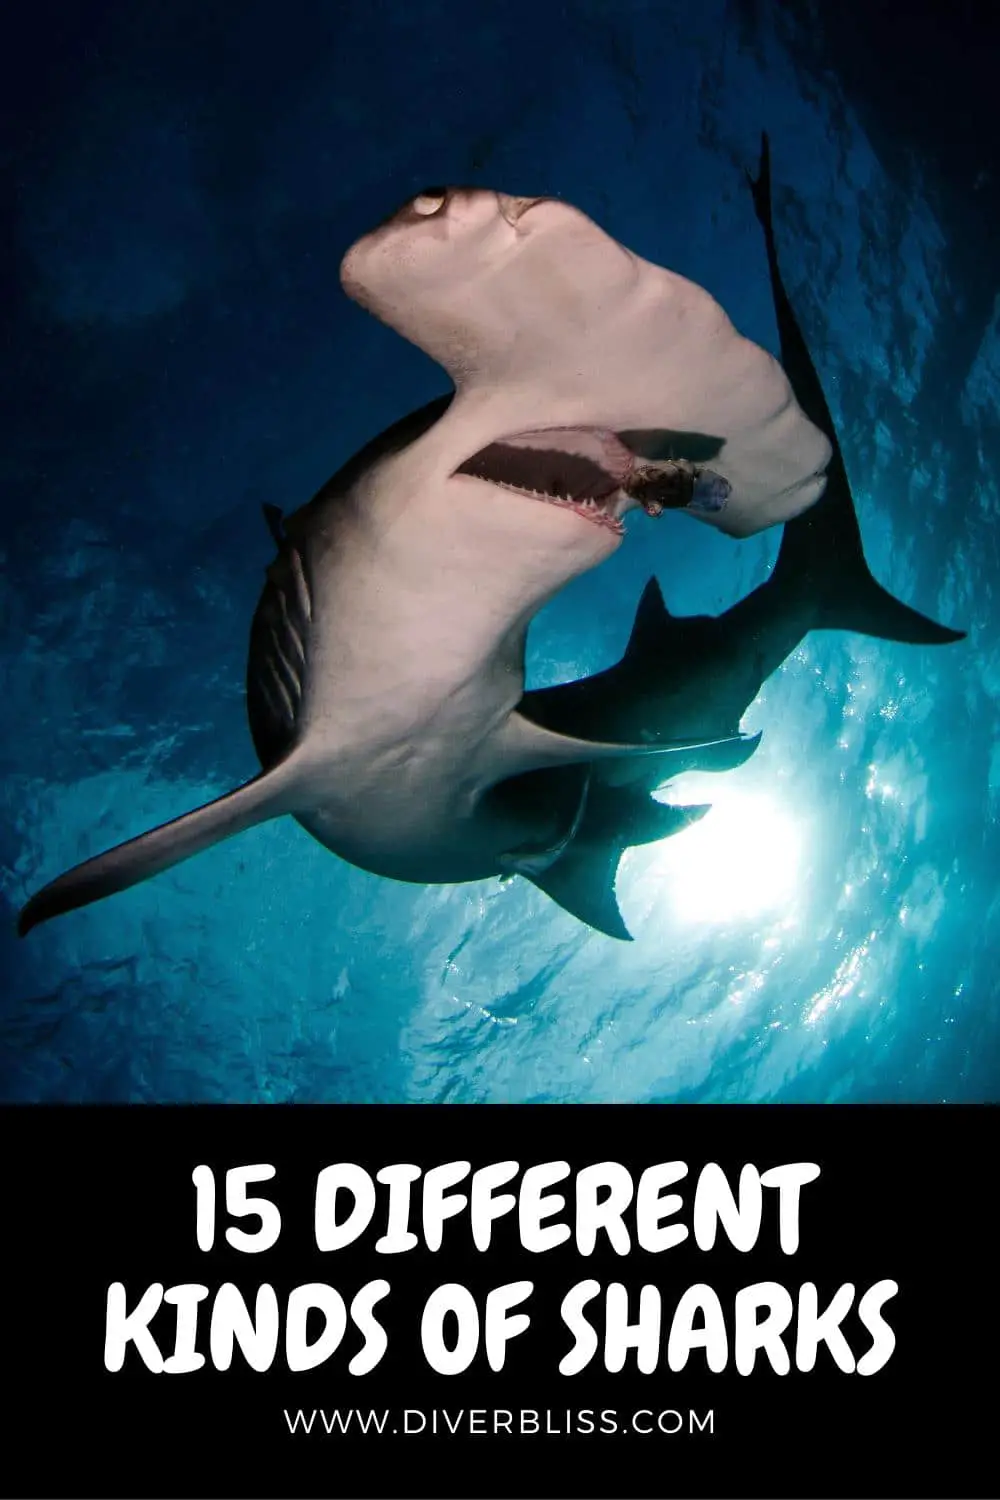 15 different kinds of sharks in the world